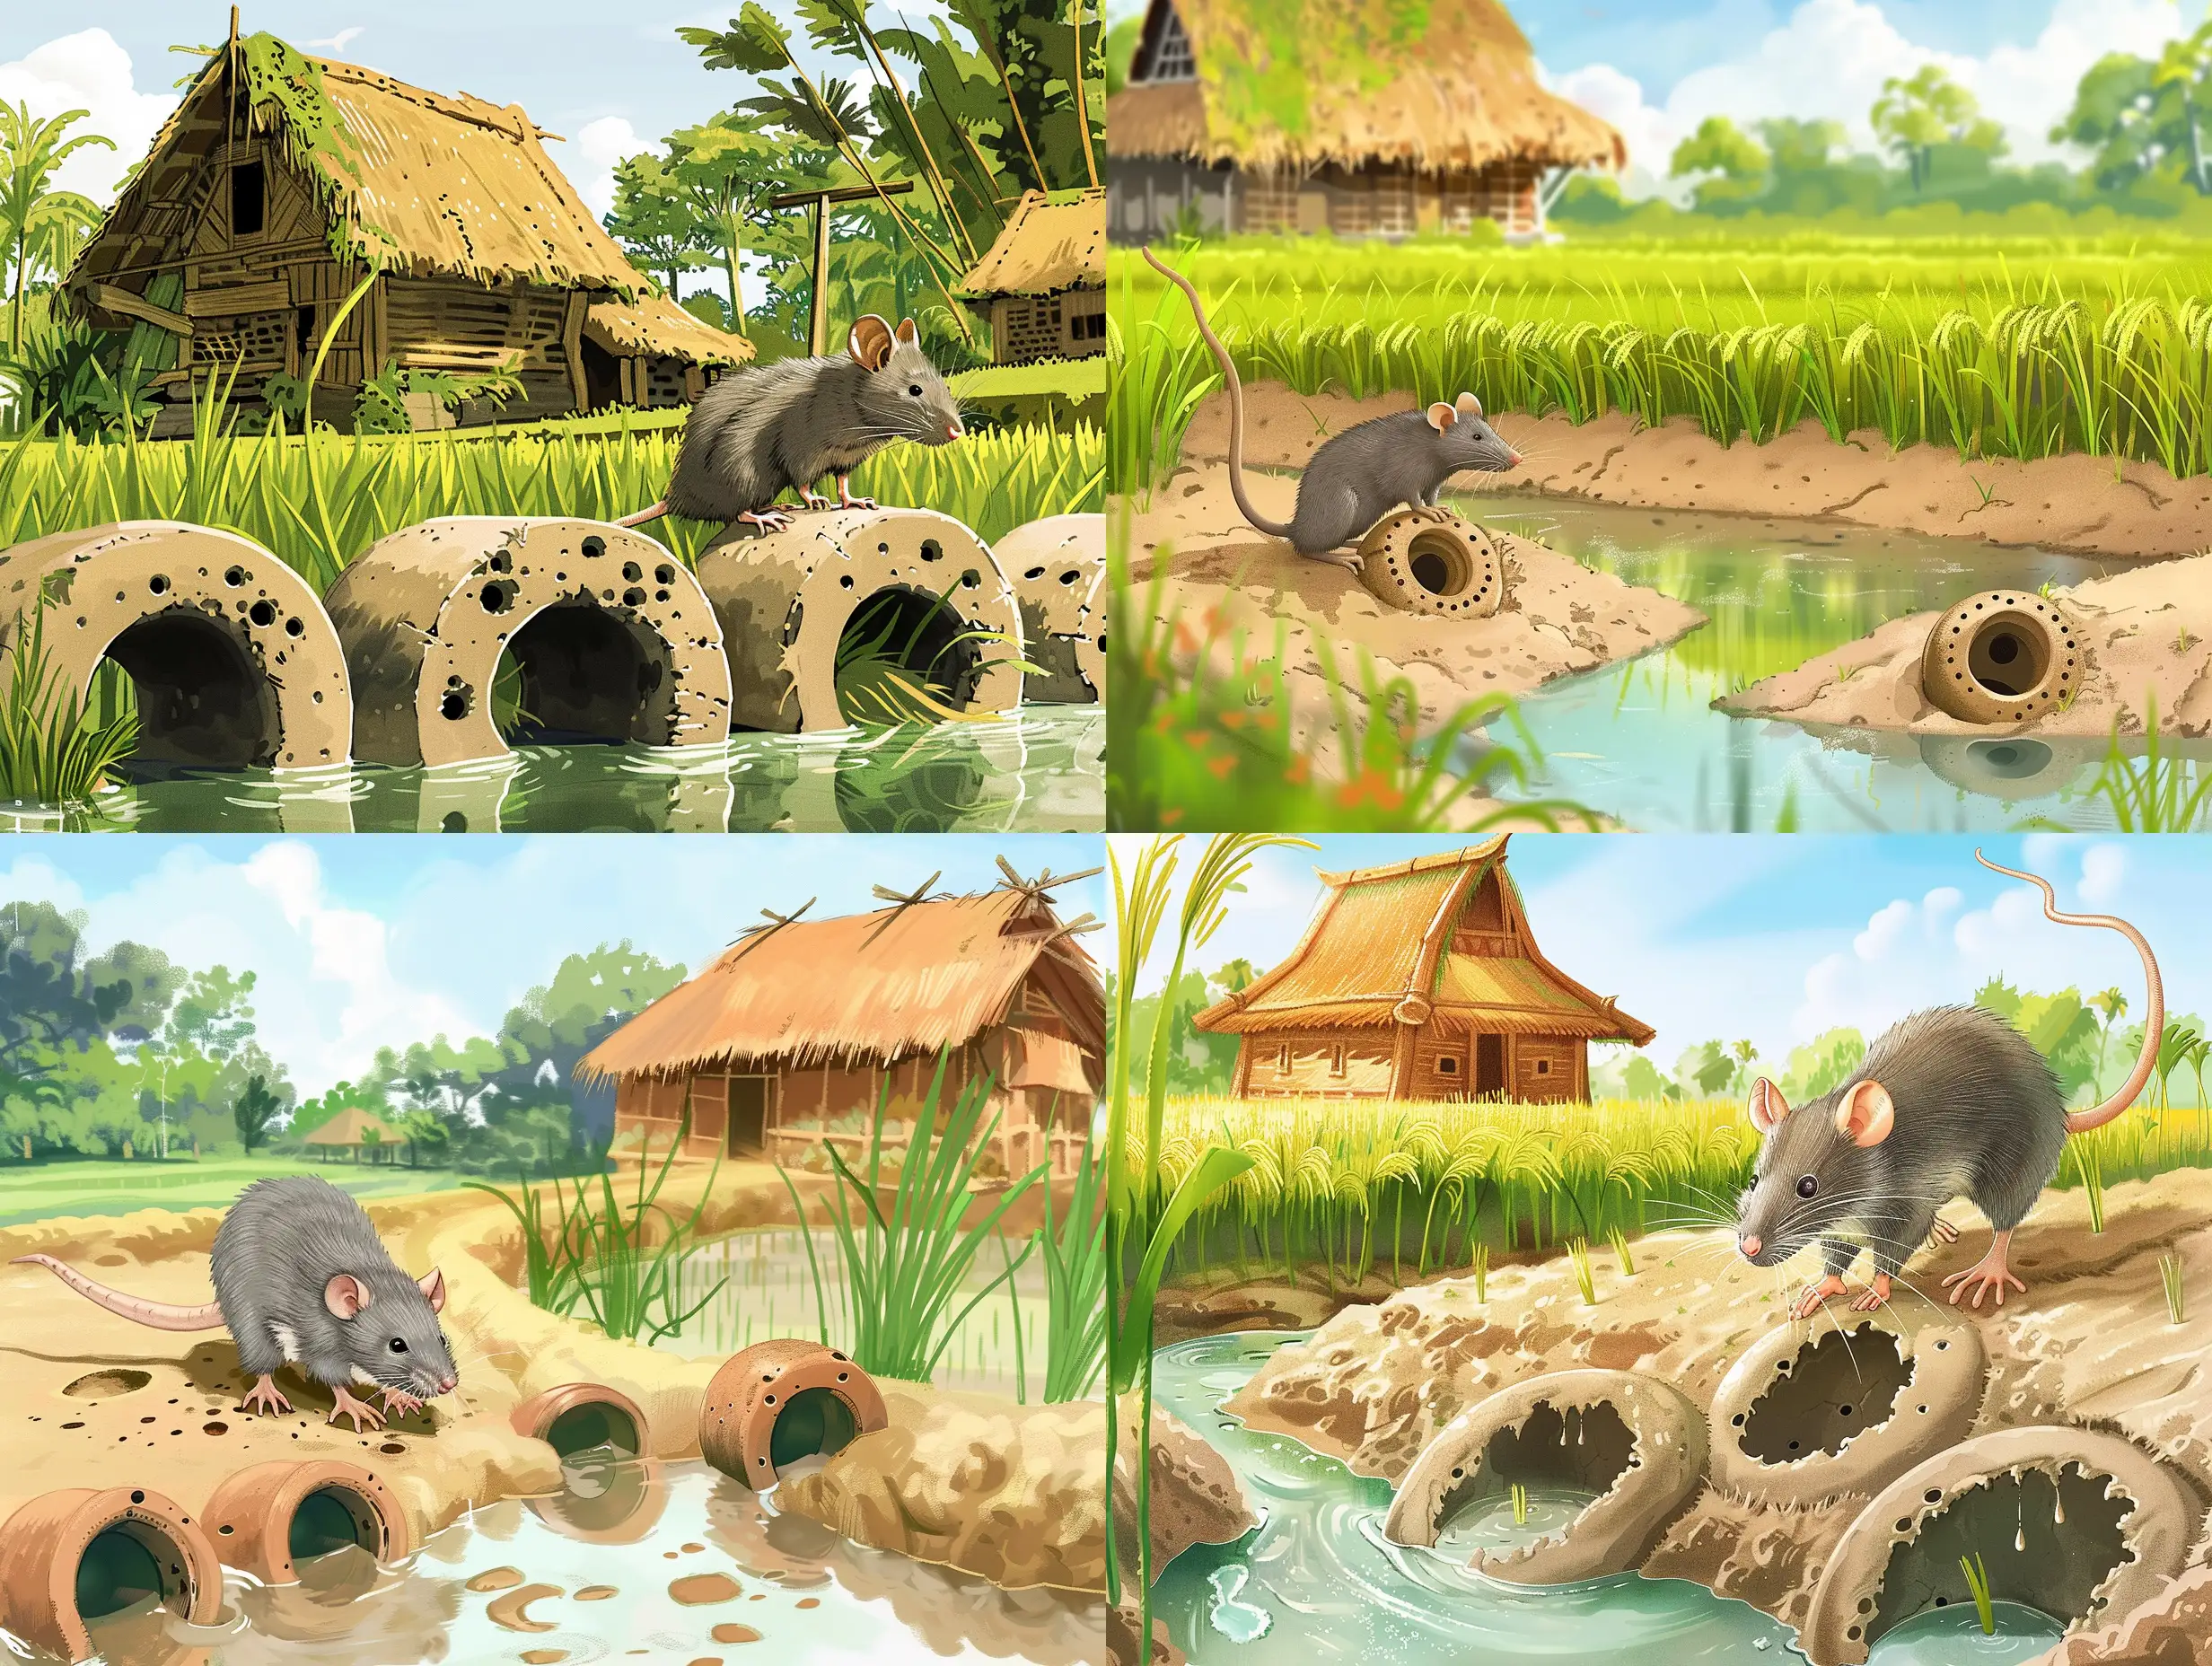 Illustration like a Disney fairytale about the gray rat who made holes in clay rollers in rice field near the peasant’s Indonesian house and the water drained away. The peasant is very upset